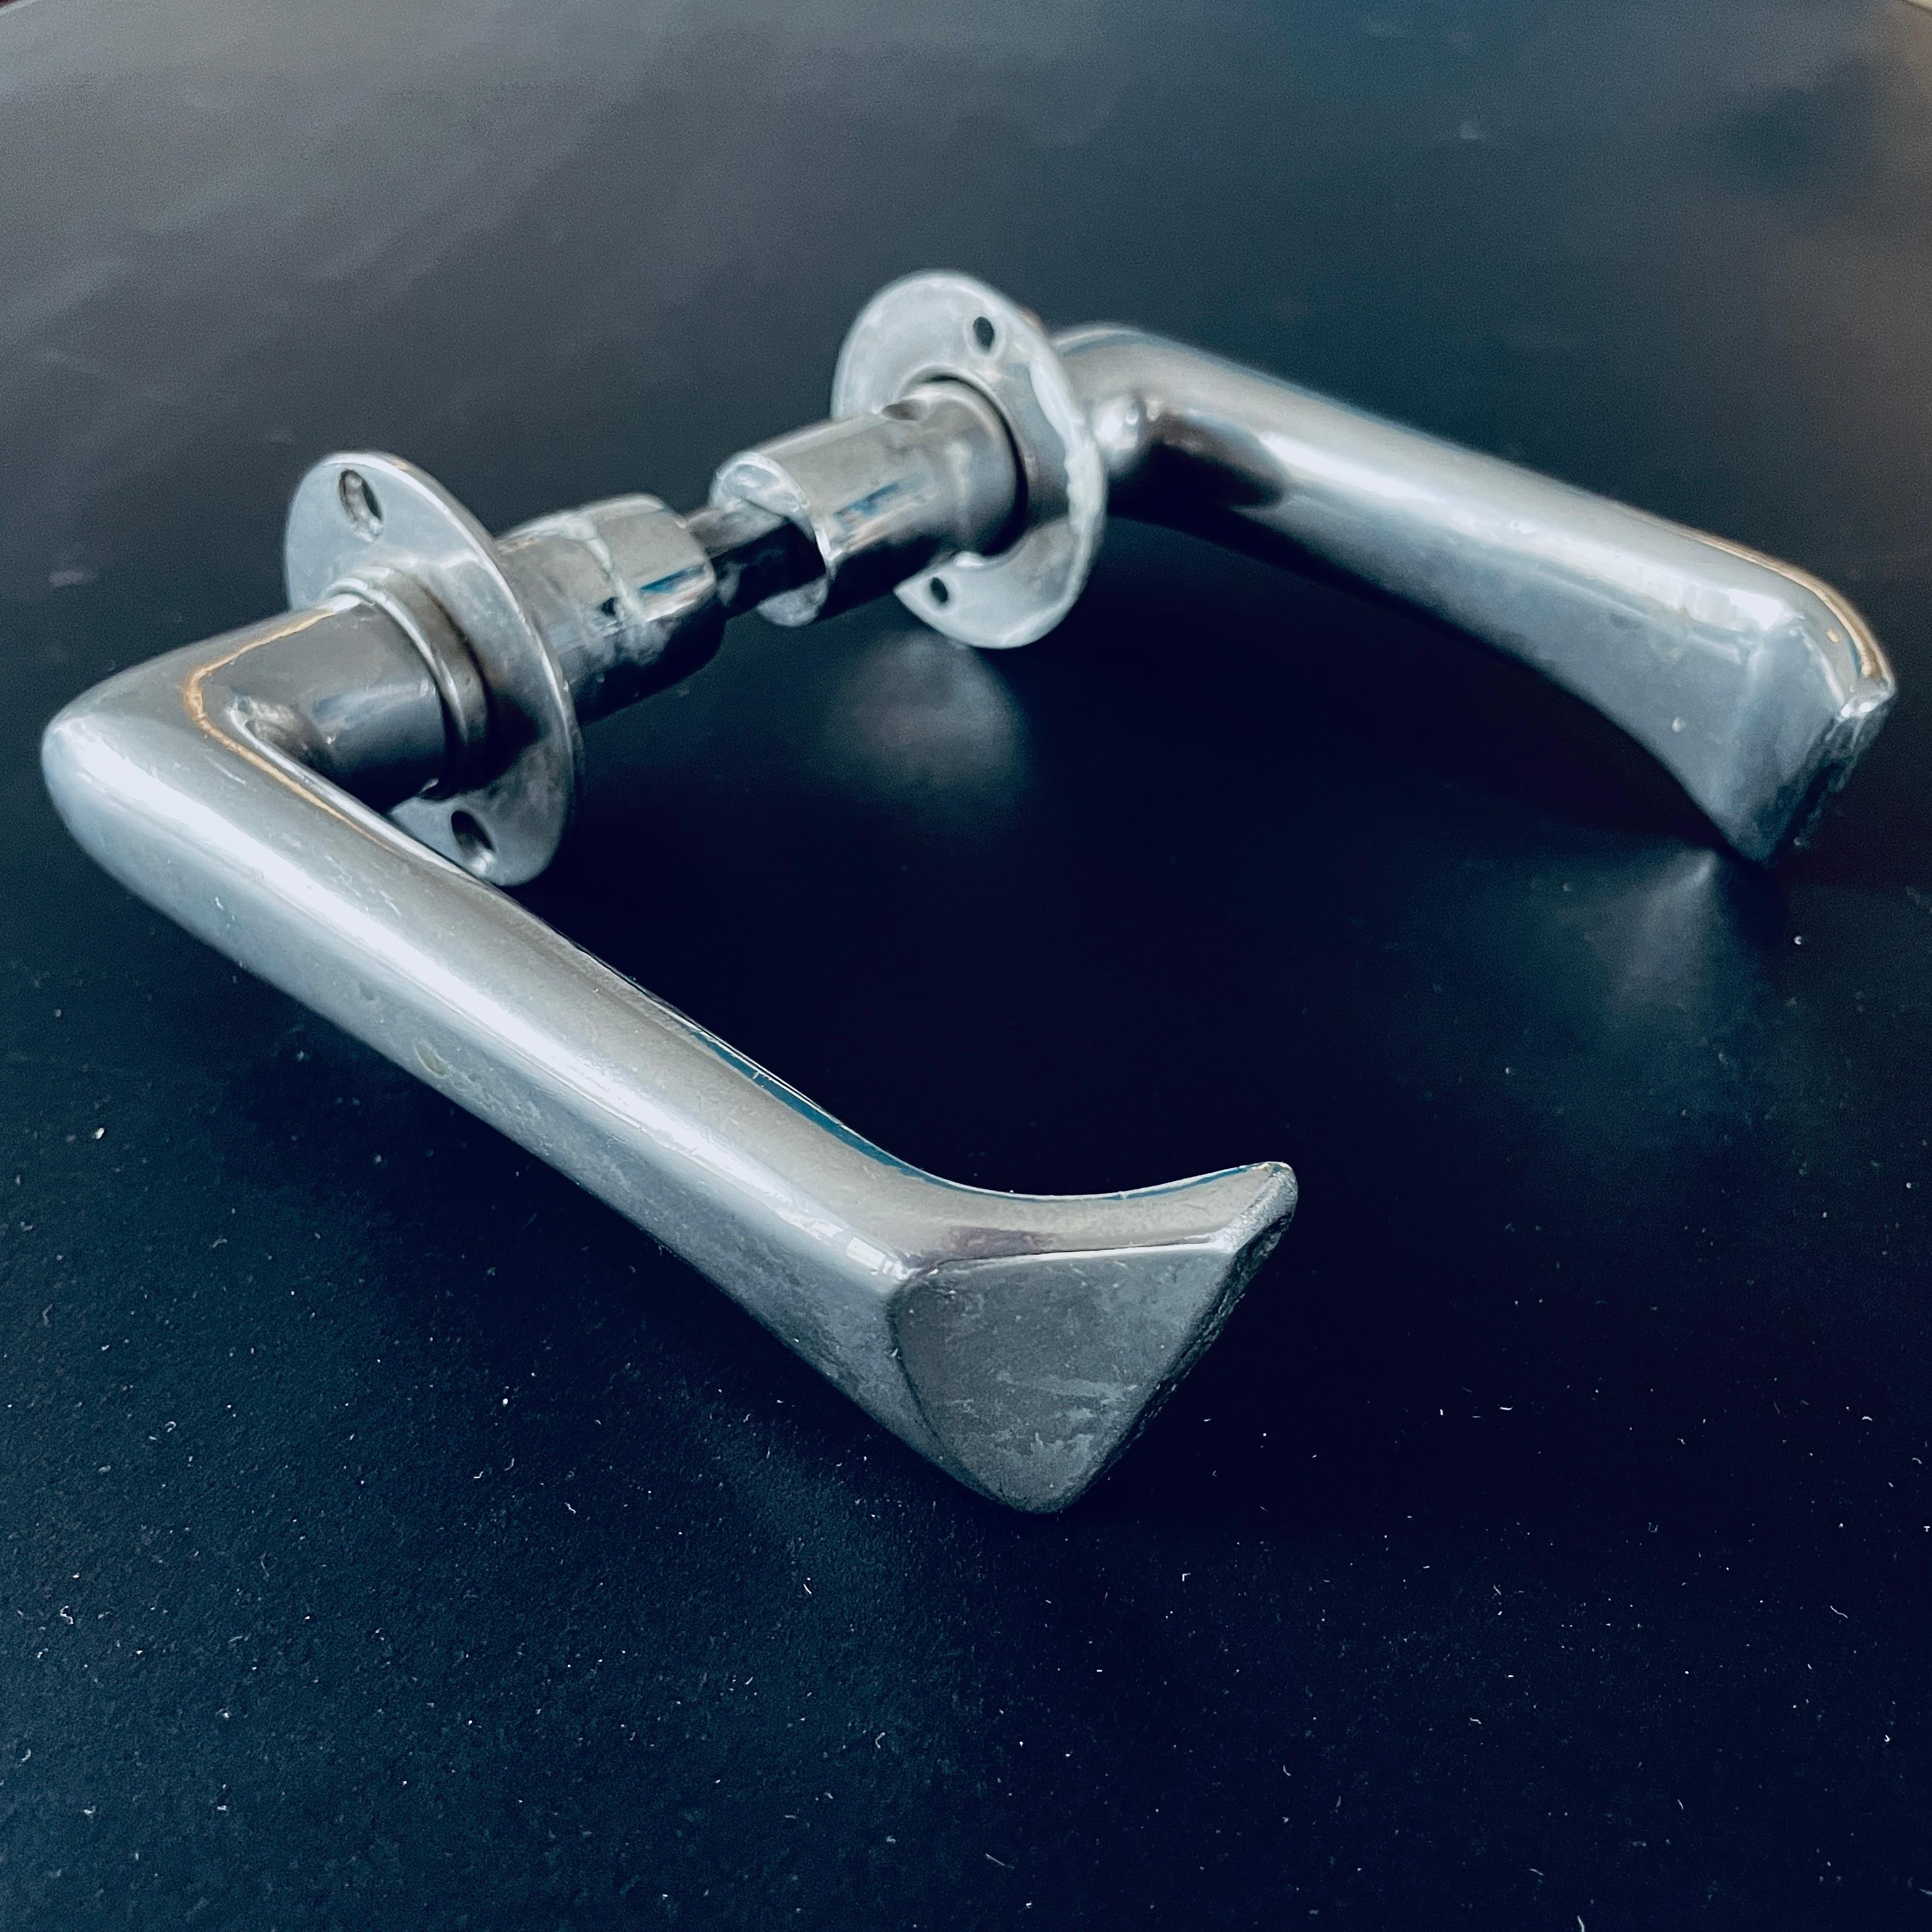 Sculptural Door Handles designed by Alvar Aalto in 1950s. Made in Finland.

Materials: Nickel-plated Bronze.

Includes two handles and spacer. No screws.

Rarely for sale. (Most of the same model are newer and made of aluminum.).